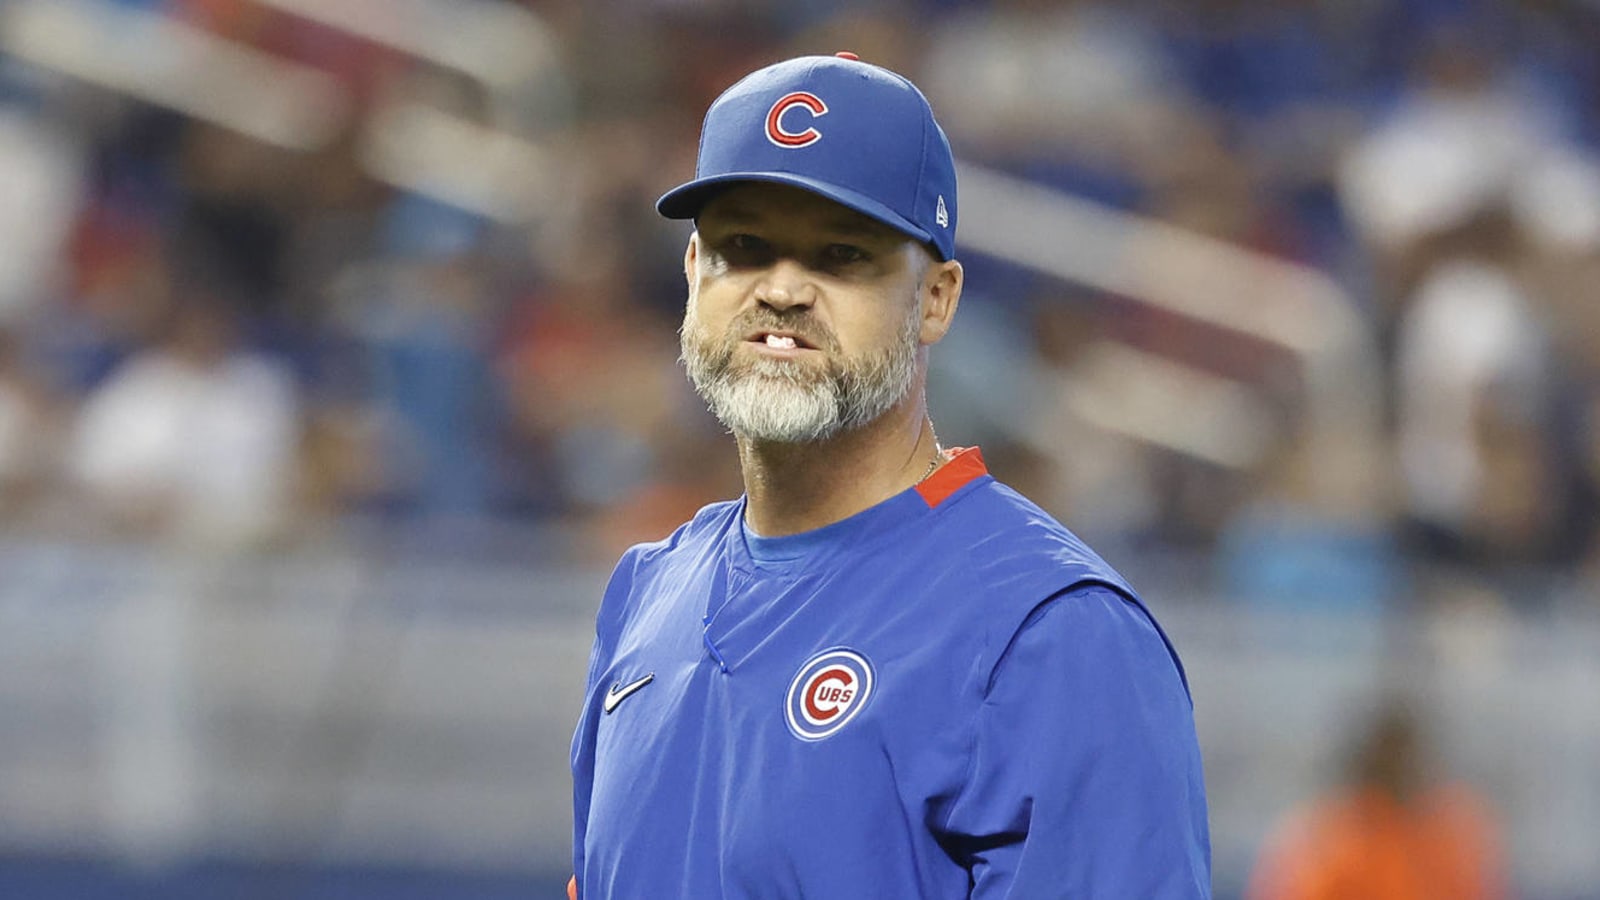 David Ross, Cubs in 'preliminary talks' about extension